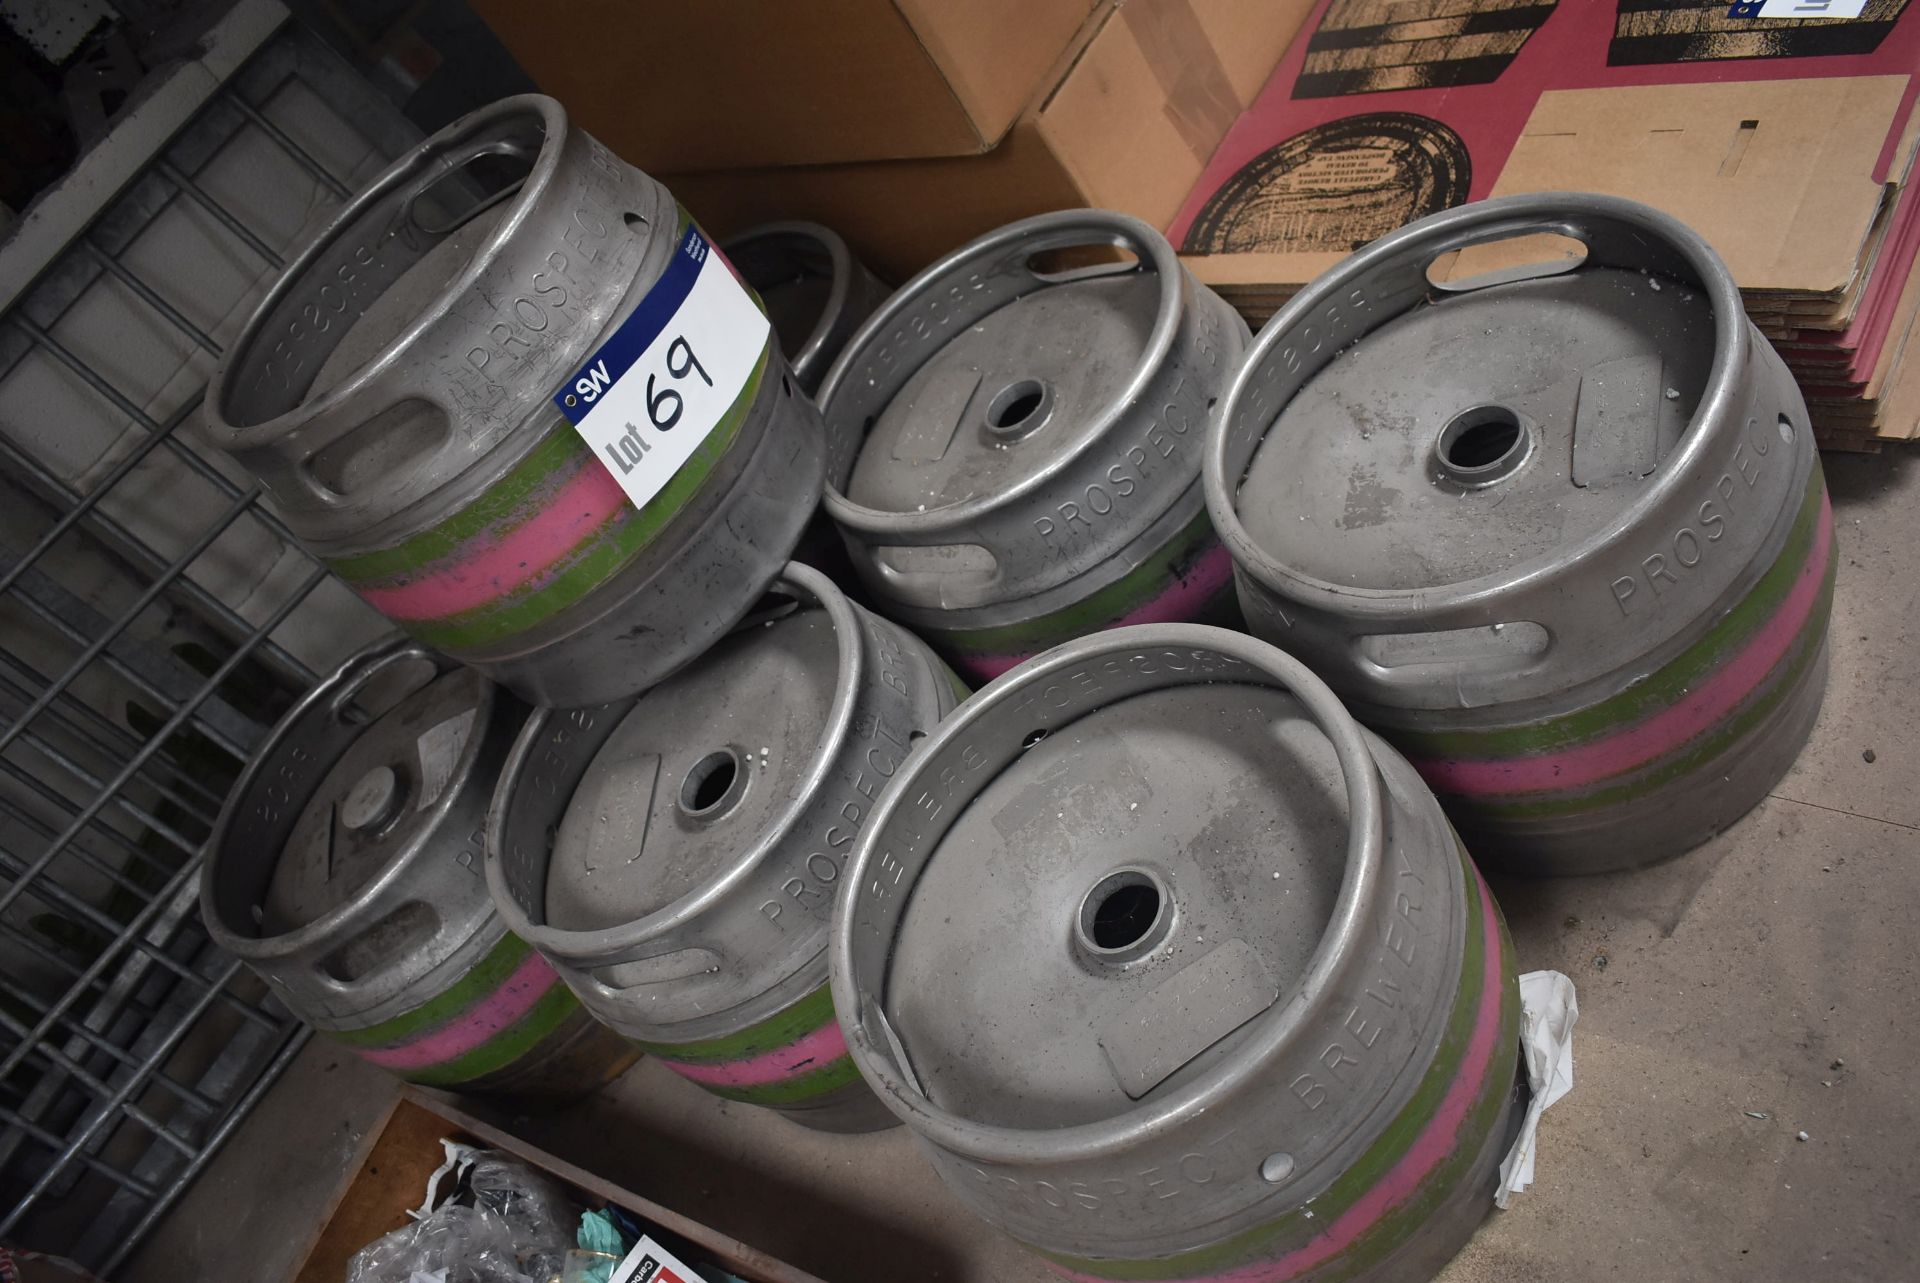 Seven “Prospect Brewery” Alloy Mini KegsPlease read the following important notes:- NOTE NO FORK